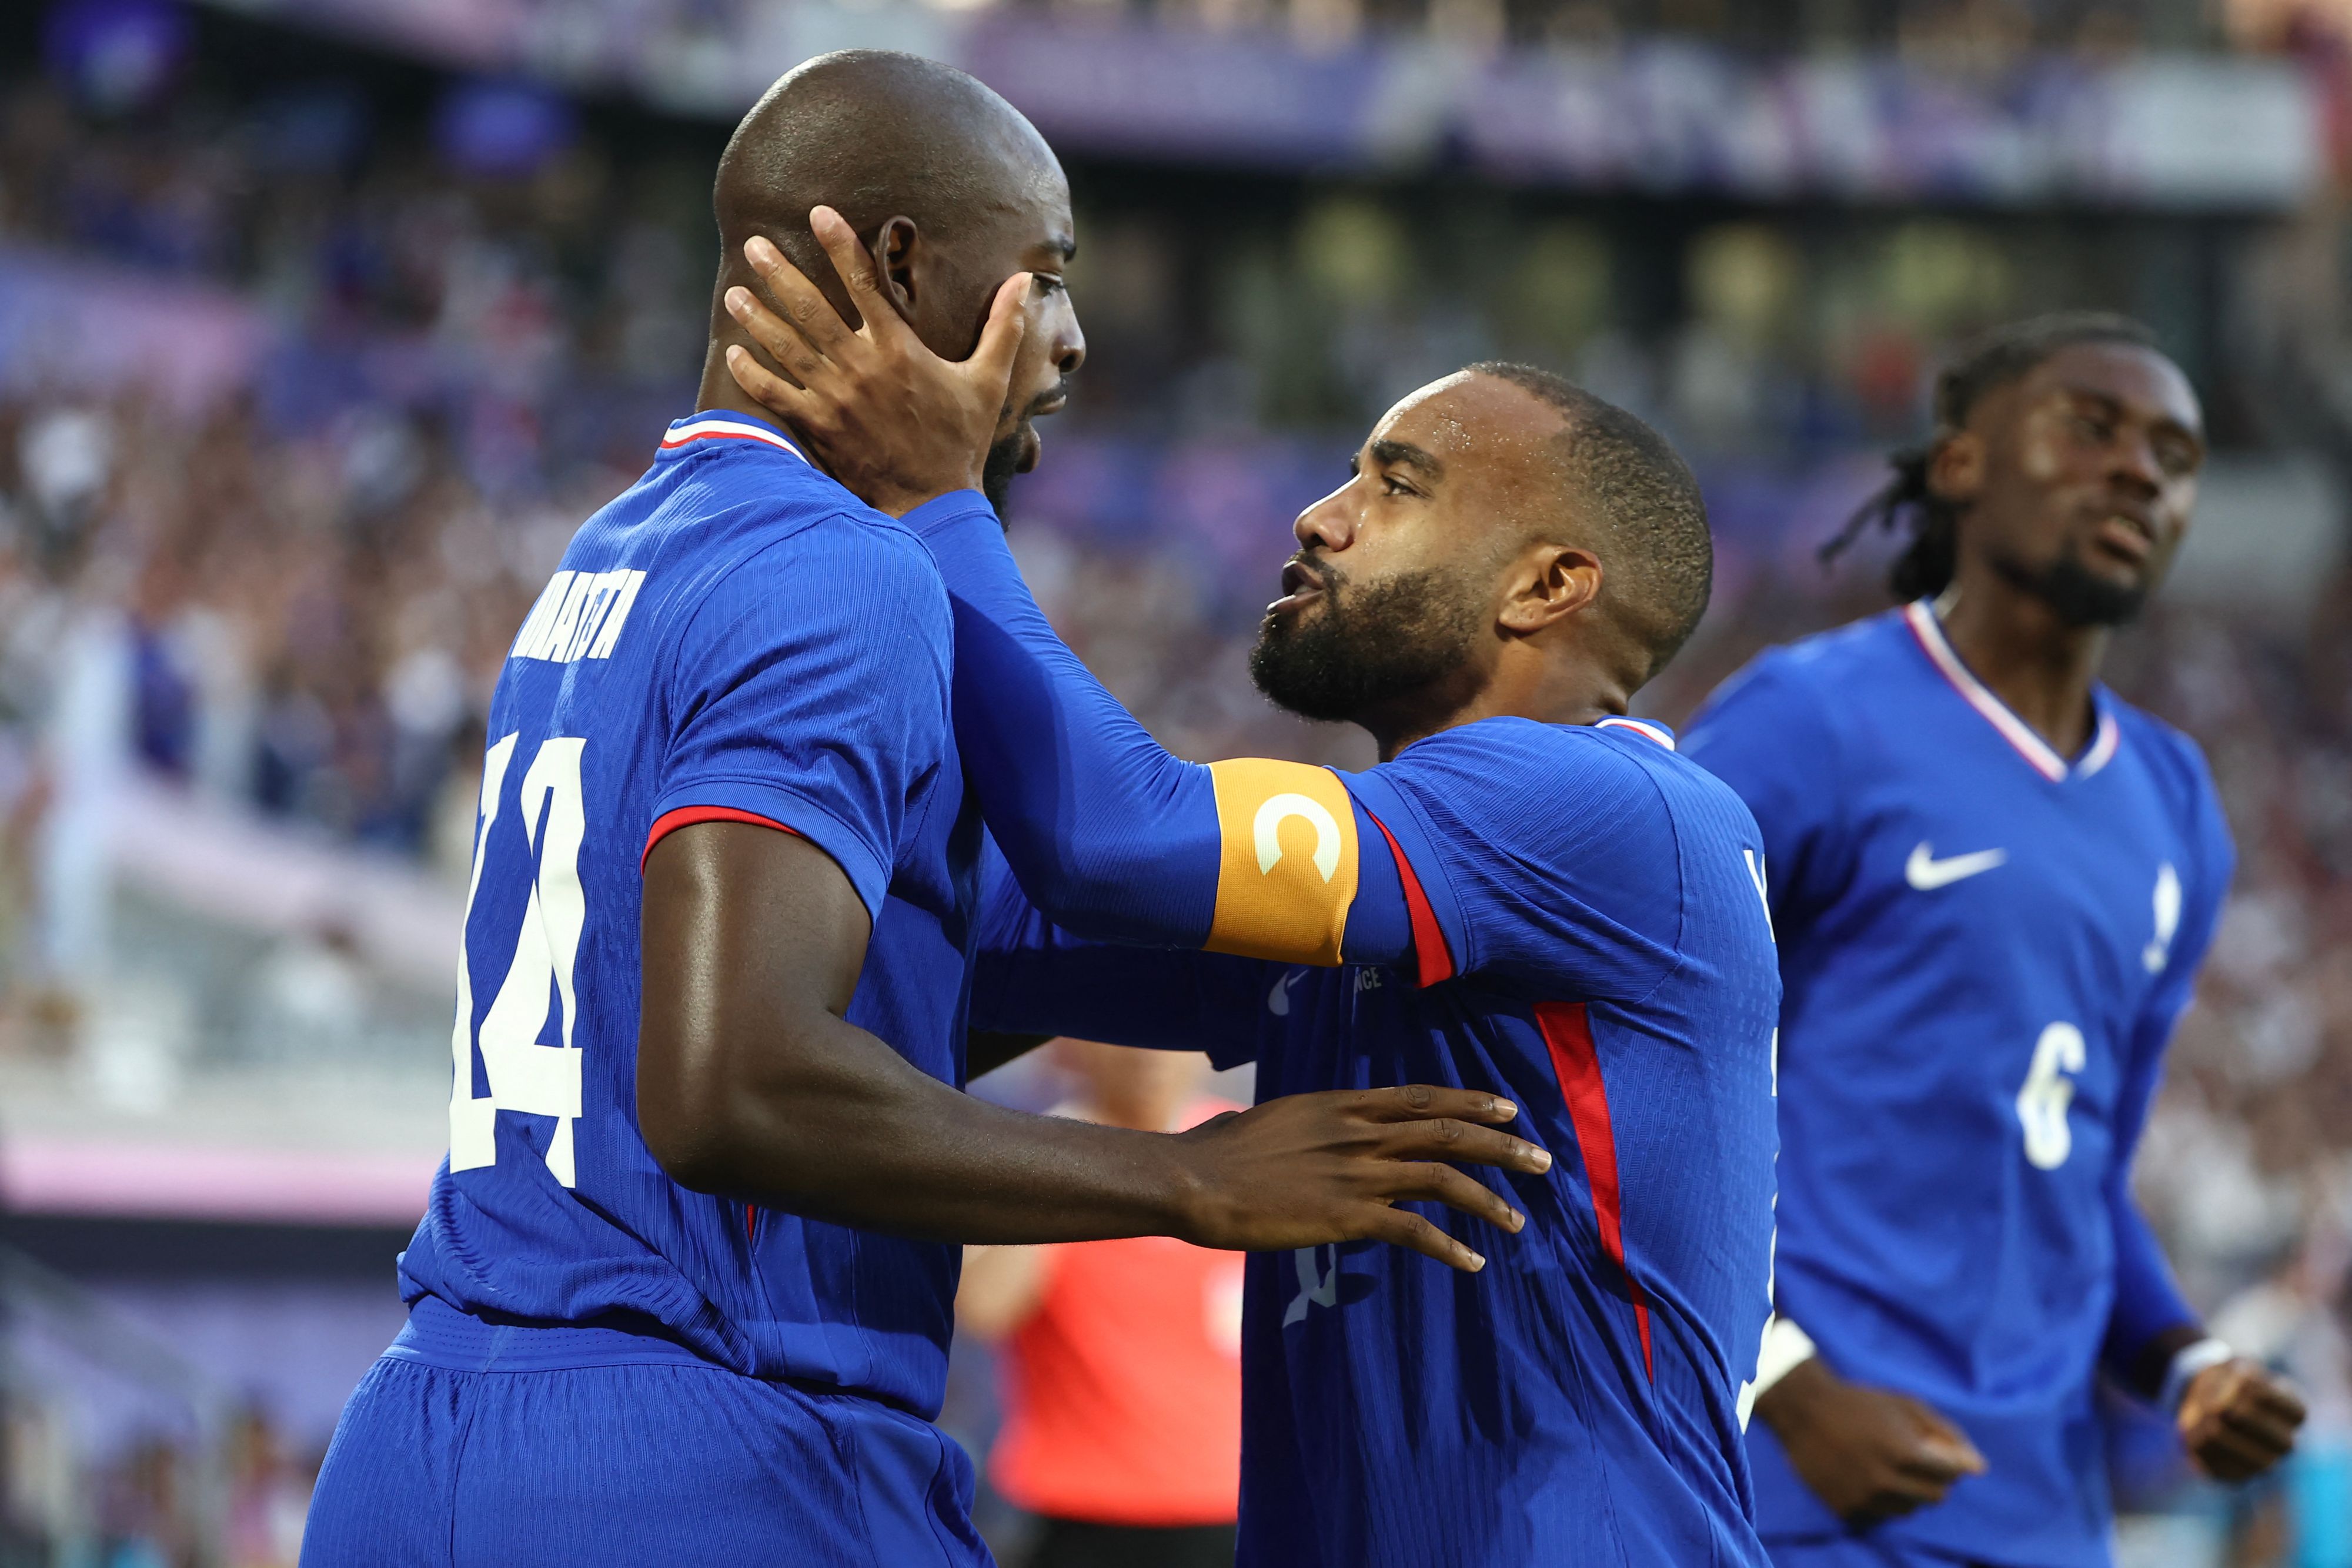 France's forward #14 Jean-Philippe Mateta (L) celebrates with France's forward #10 Alexandre Lacazette after scoring his team's first goal in the men's quarter-final football match between France and Argentina during the Paris 2024 Olympic Games at the Bordeaux Stadium in Bordeaux on August 2, 2024. (Photo by ROMAIN PERROCHEAU / AFP)